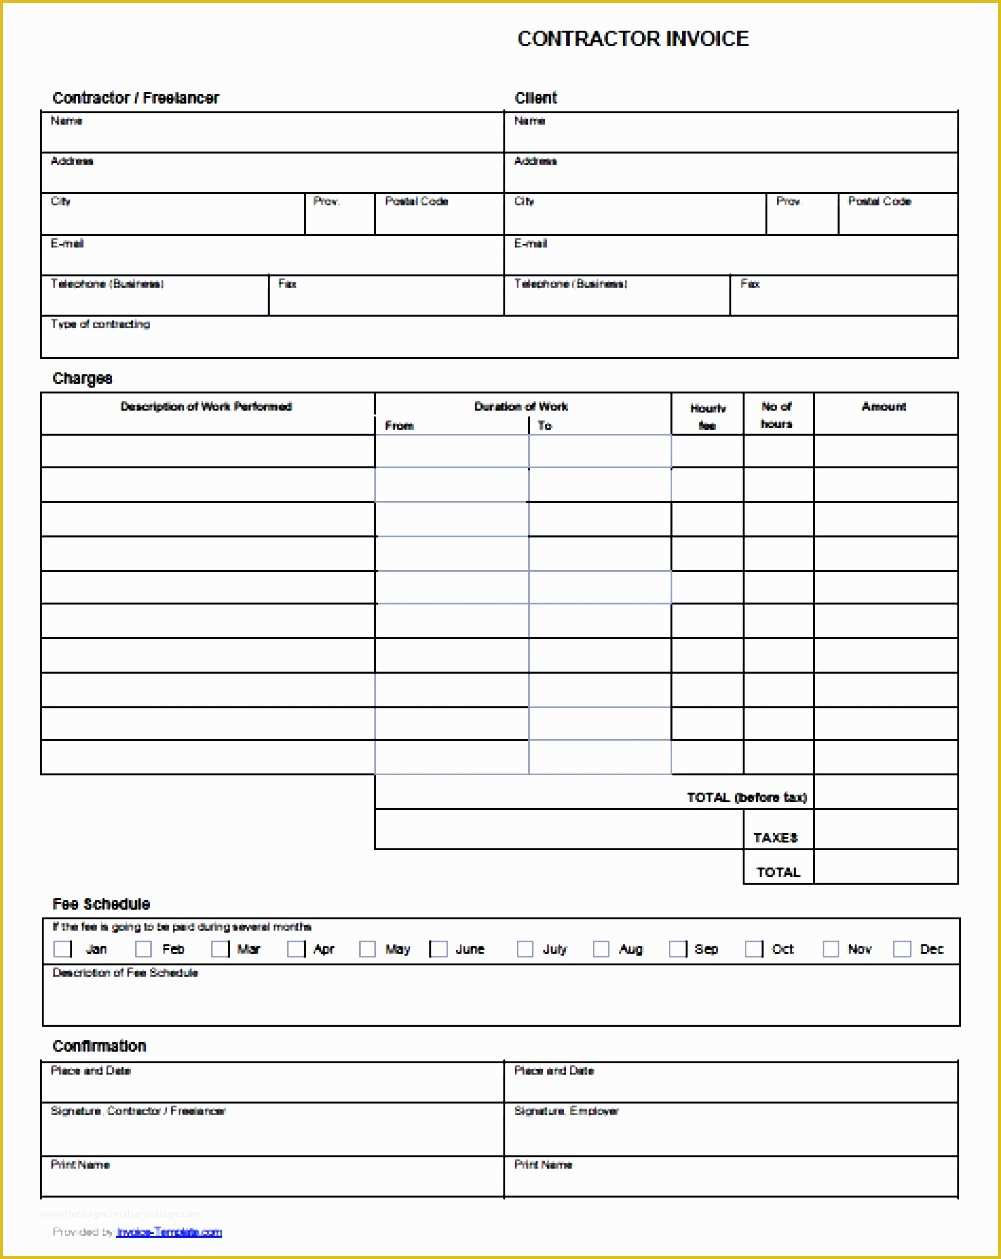 Construction Invoice Template Excel Free Of Contractor Invoice Template Free Excel Archives